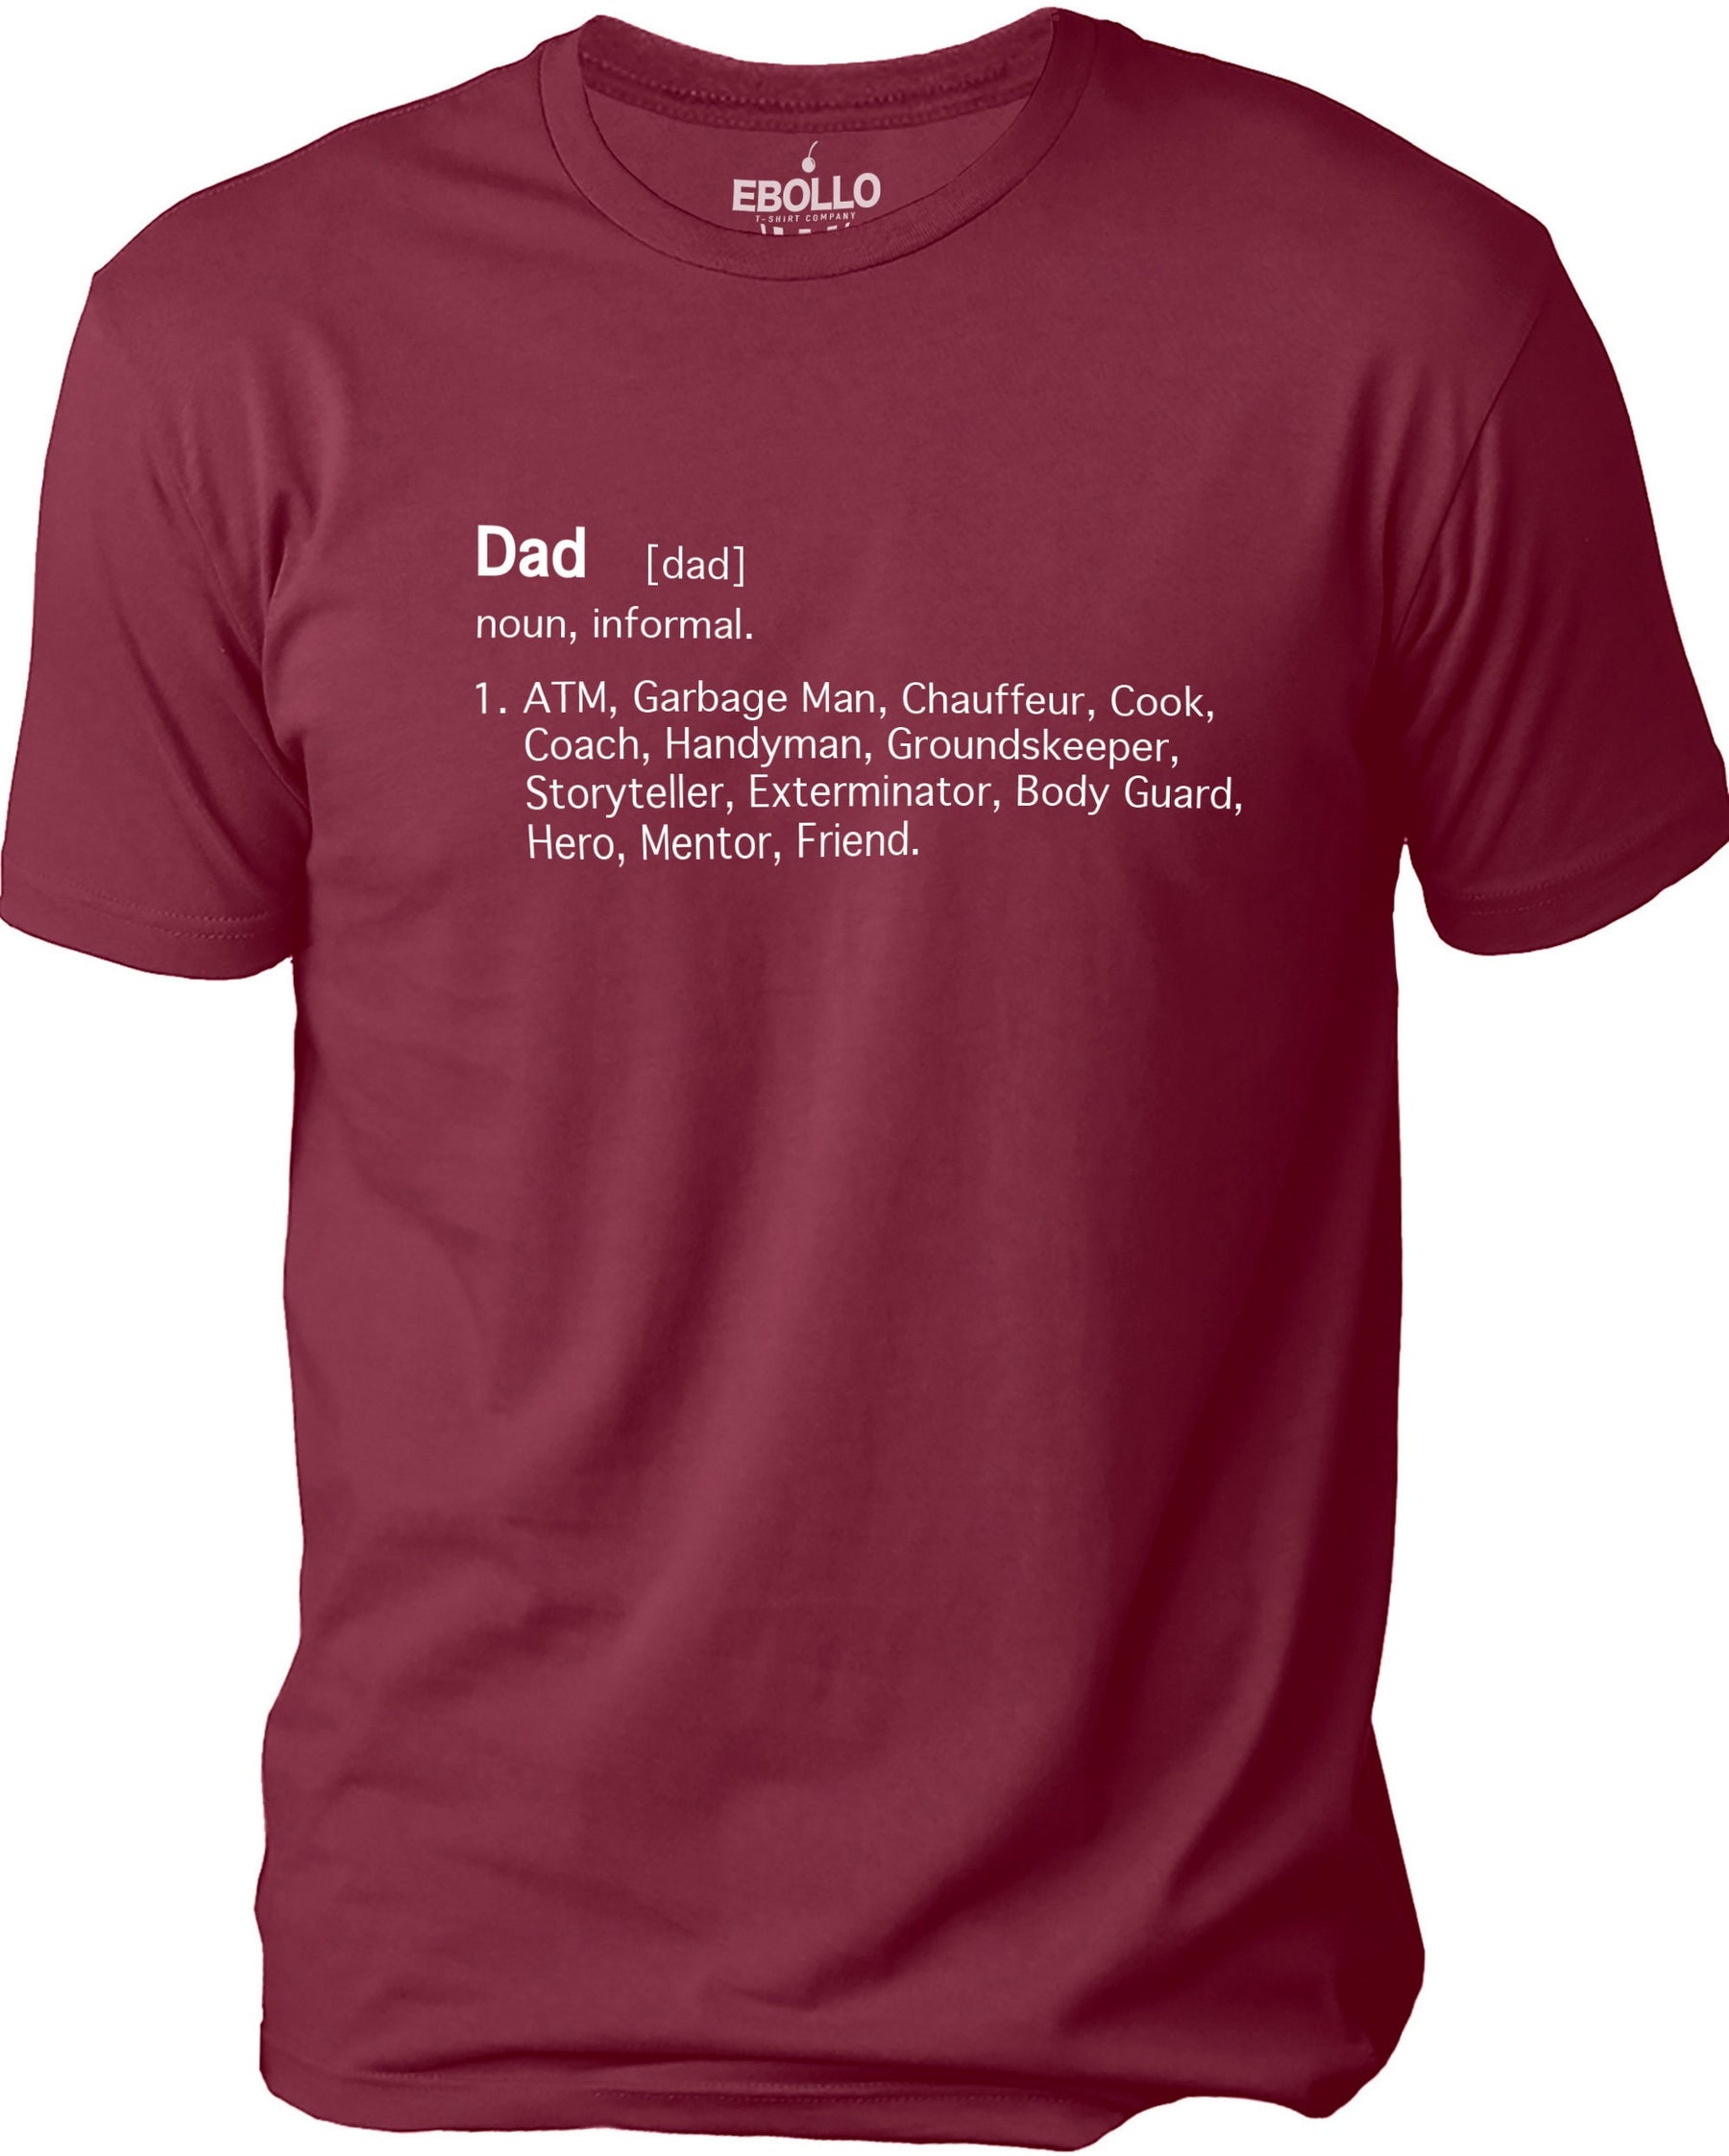 Fathers Day Gift, Dad Definition Shirt, Gifts for Dad - Funny Shirt for  Men - Gift from Daughter to Dad - Dad Shirt - Funny Dad Shirt